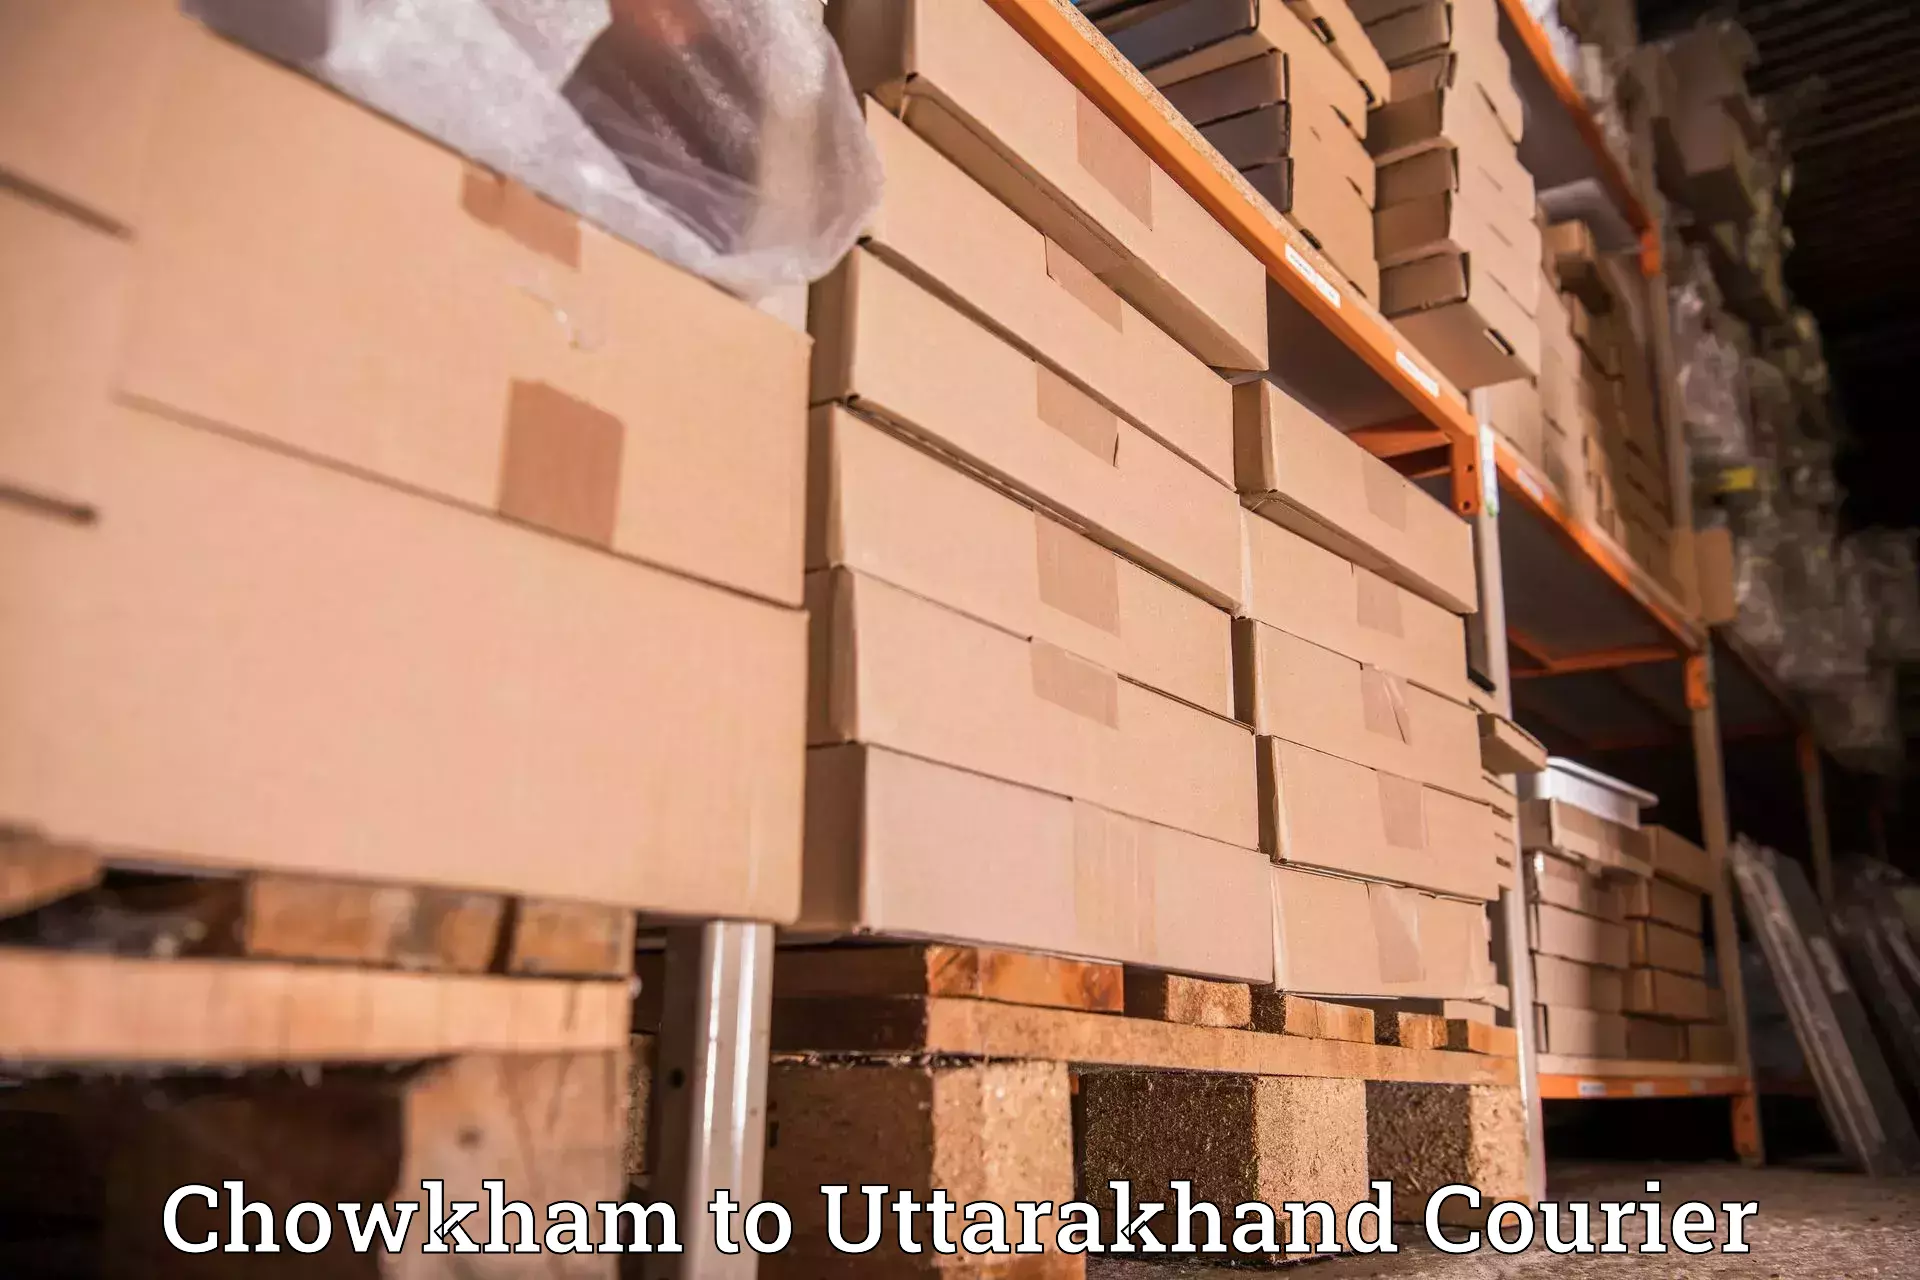 Business delivery service Chowkham to Dehradun